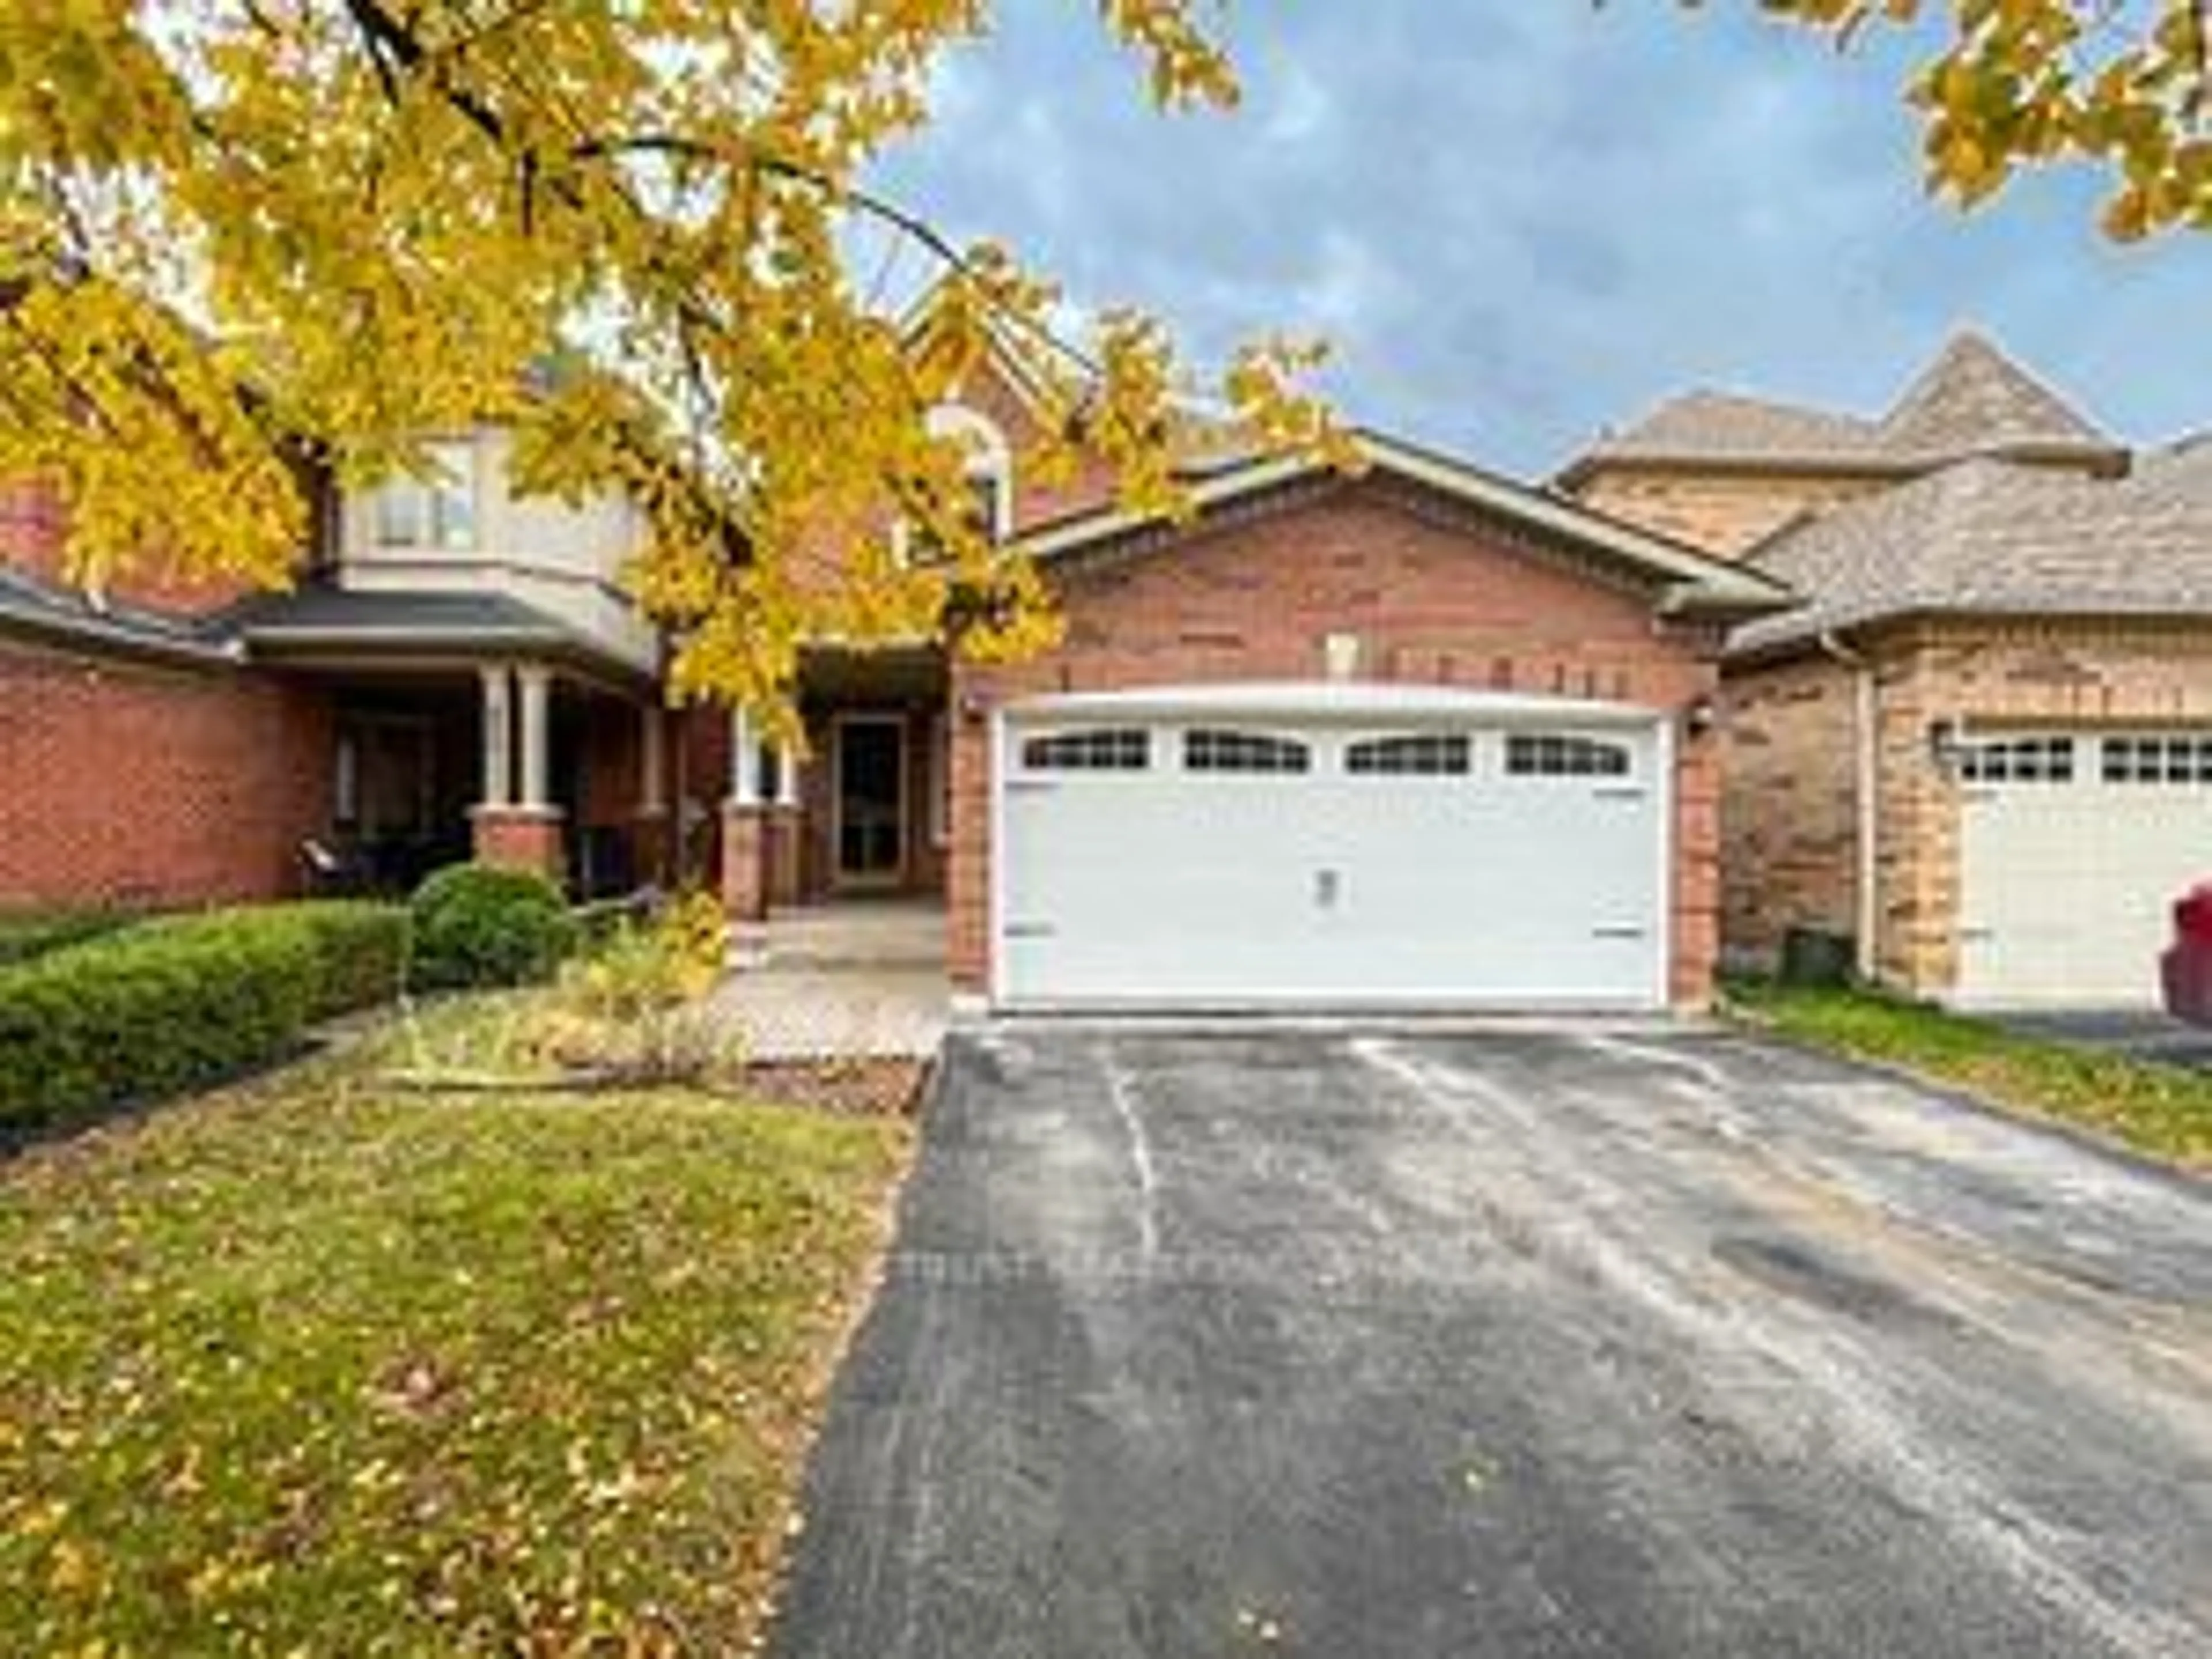 Home with brick exterior material for 457 Hewitt Circ, Newmarket Ontario L3X 2M1